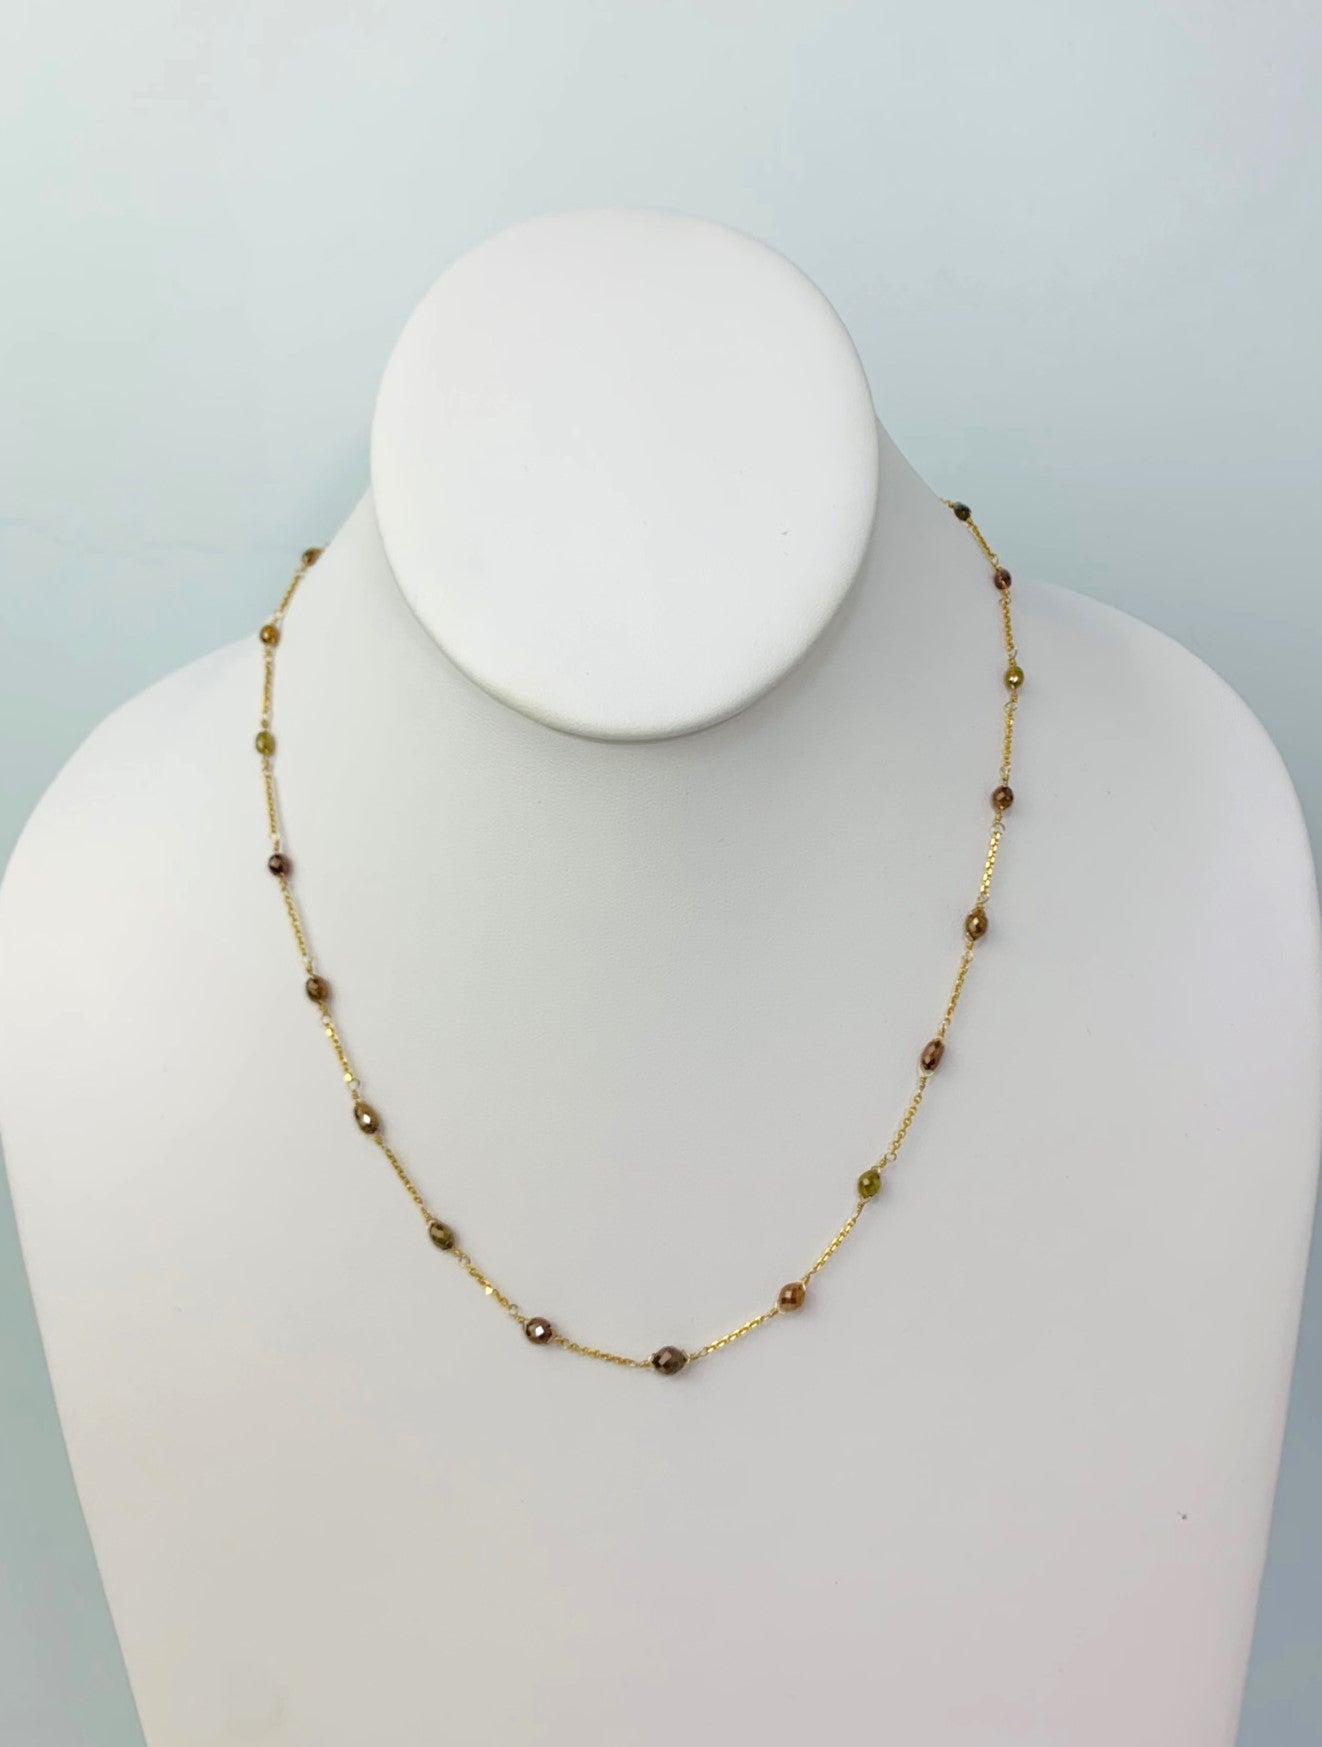 18" Brown Diamond Station Necklace in 18KY - NCK-030-TNCDIA18Y-BRN-18 5ctw